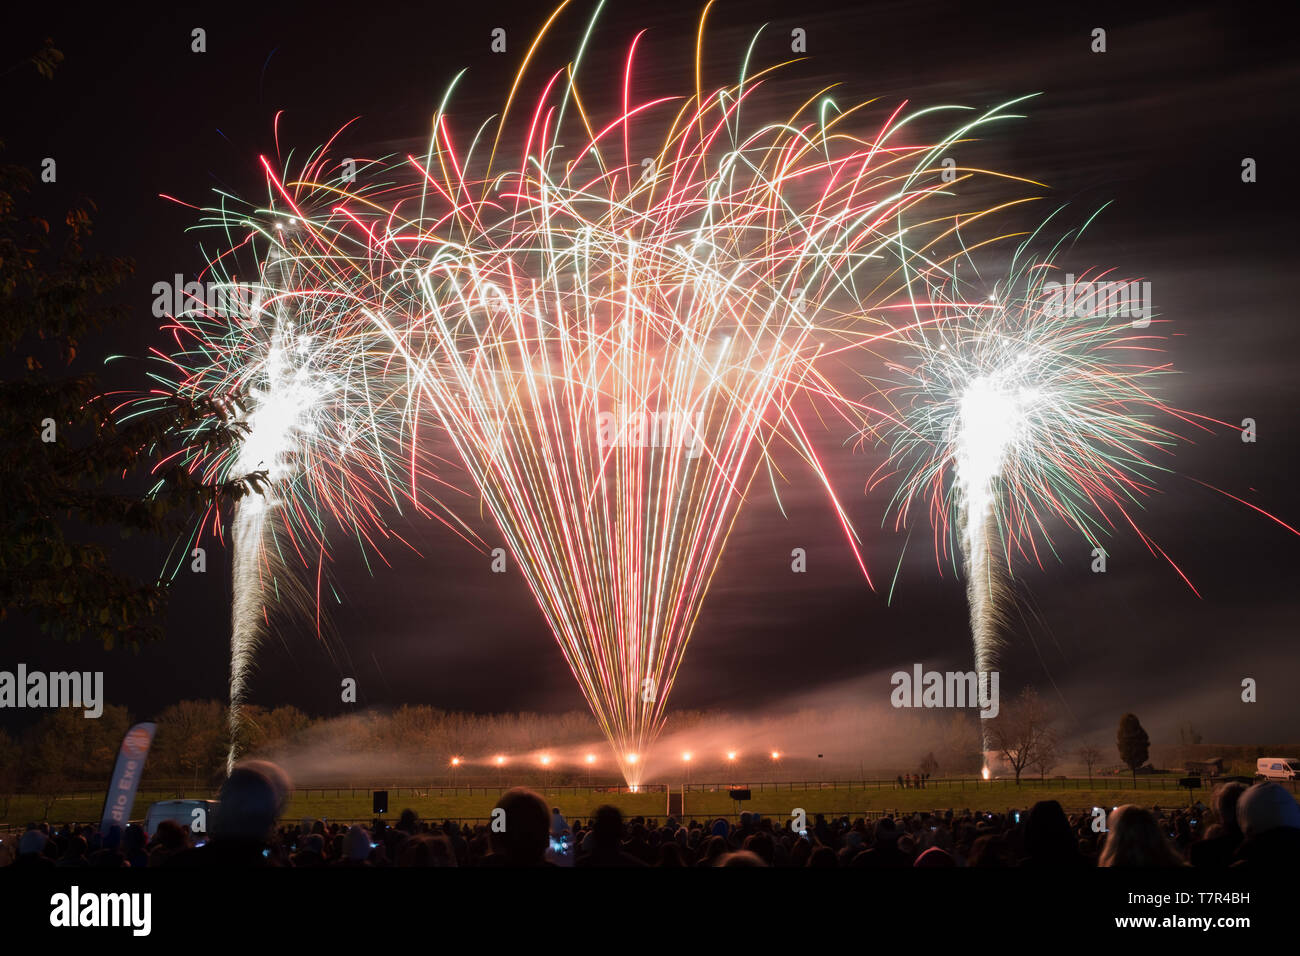 A public firework display in celebration of bonfire night at Westpoint Showgrounds. Exeter, Devon, UK, taken from the back of the crowd Stock Photo